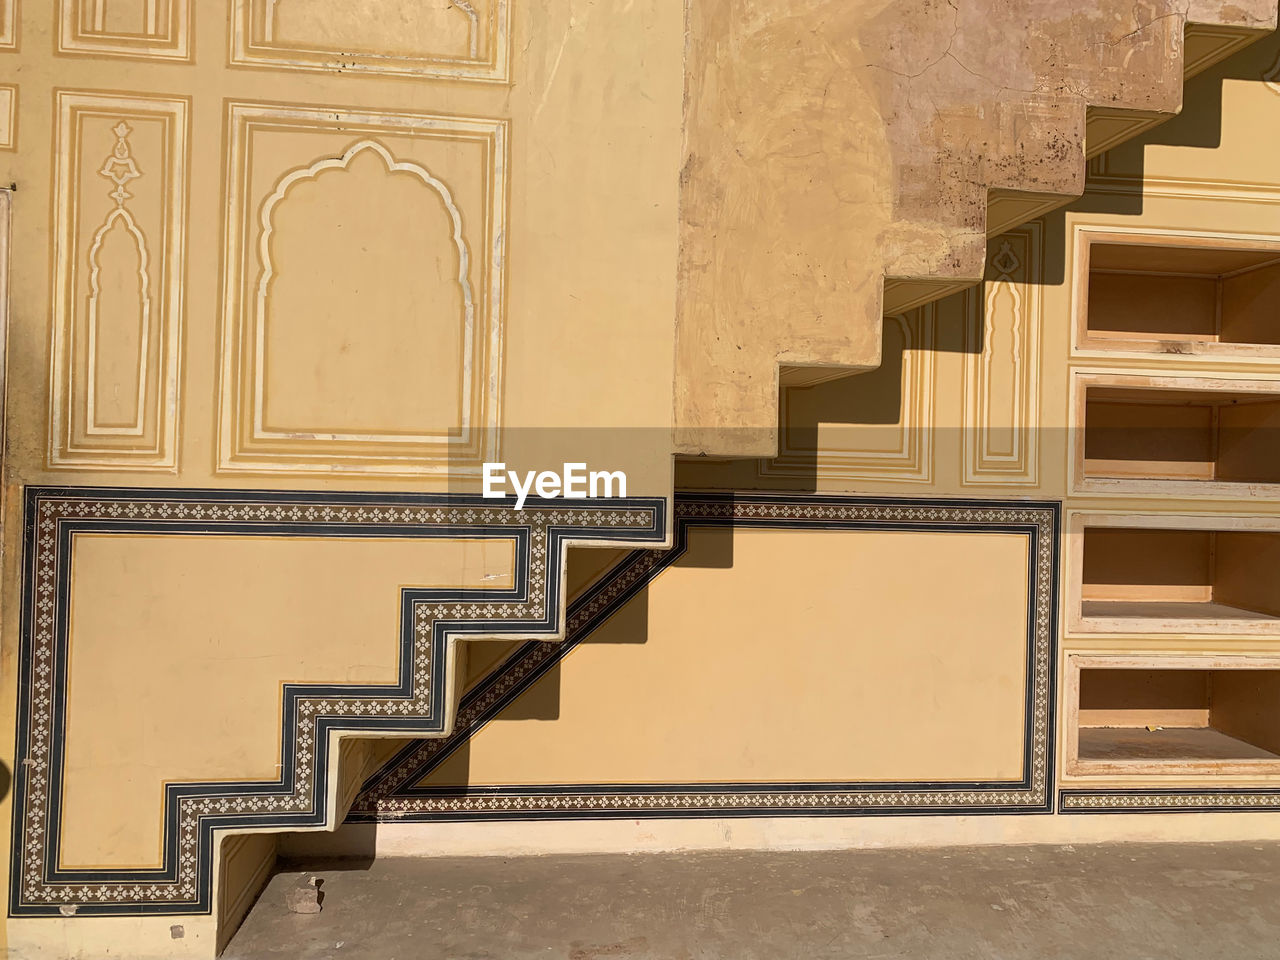 Staircase in the indian fort of nahargarh with reflection over the wall.